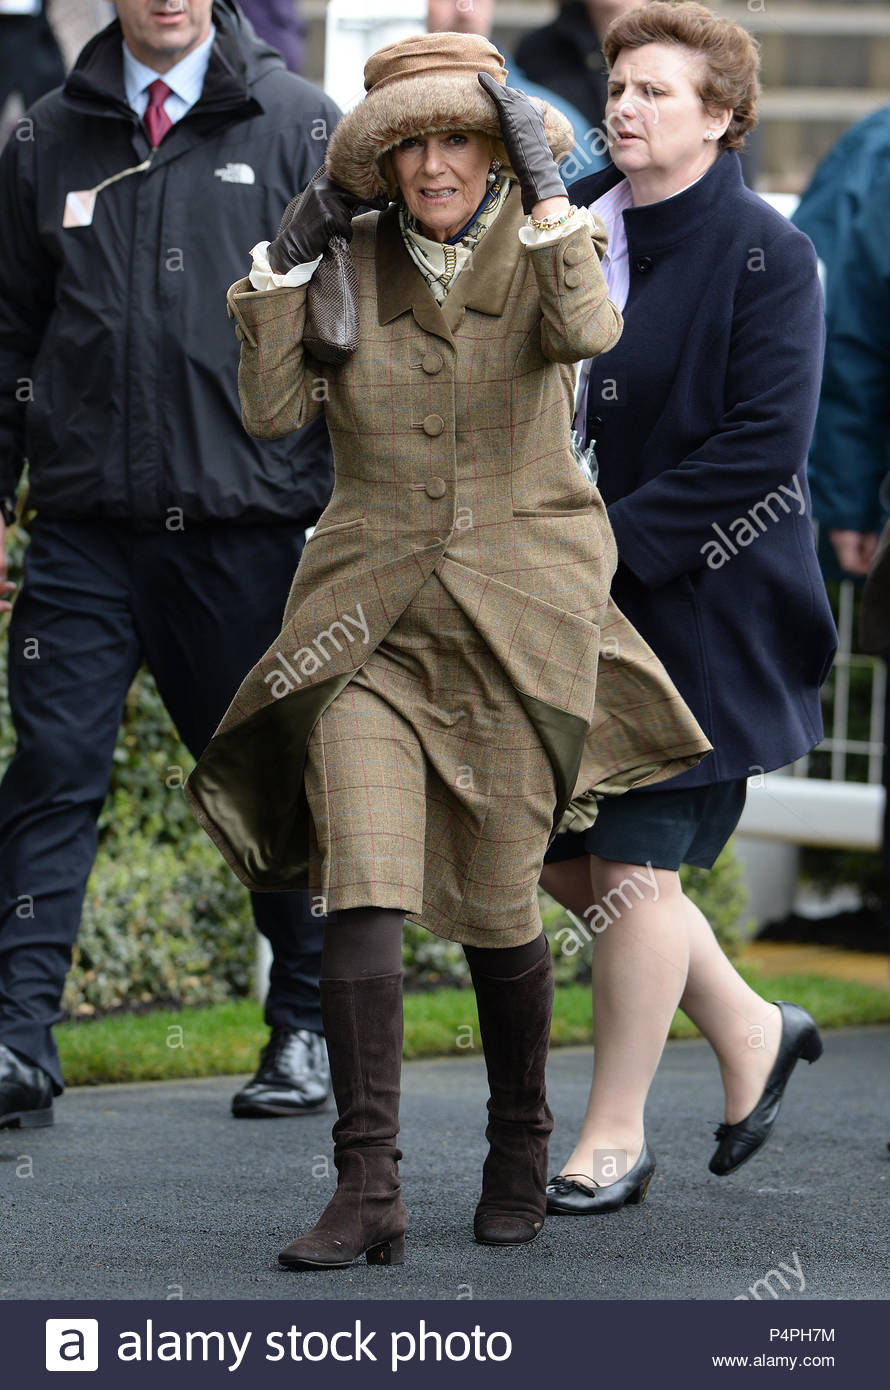 camilla-duchess-of-cornwall-the-prince-of-wales-and-the-duchess-of-cornwall-attend-the-princes-countryside-fund-raceday-at-ascot-racecourse-ascot-berkshire-uk-on-the-29th-march-2015-P4PH7M.jpg